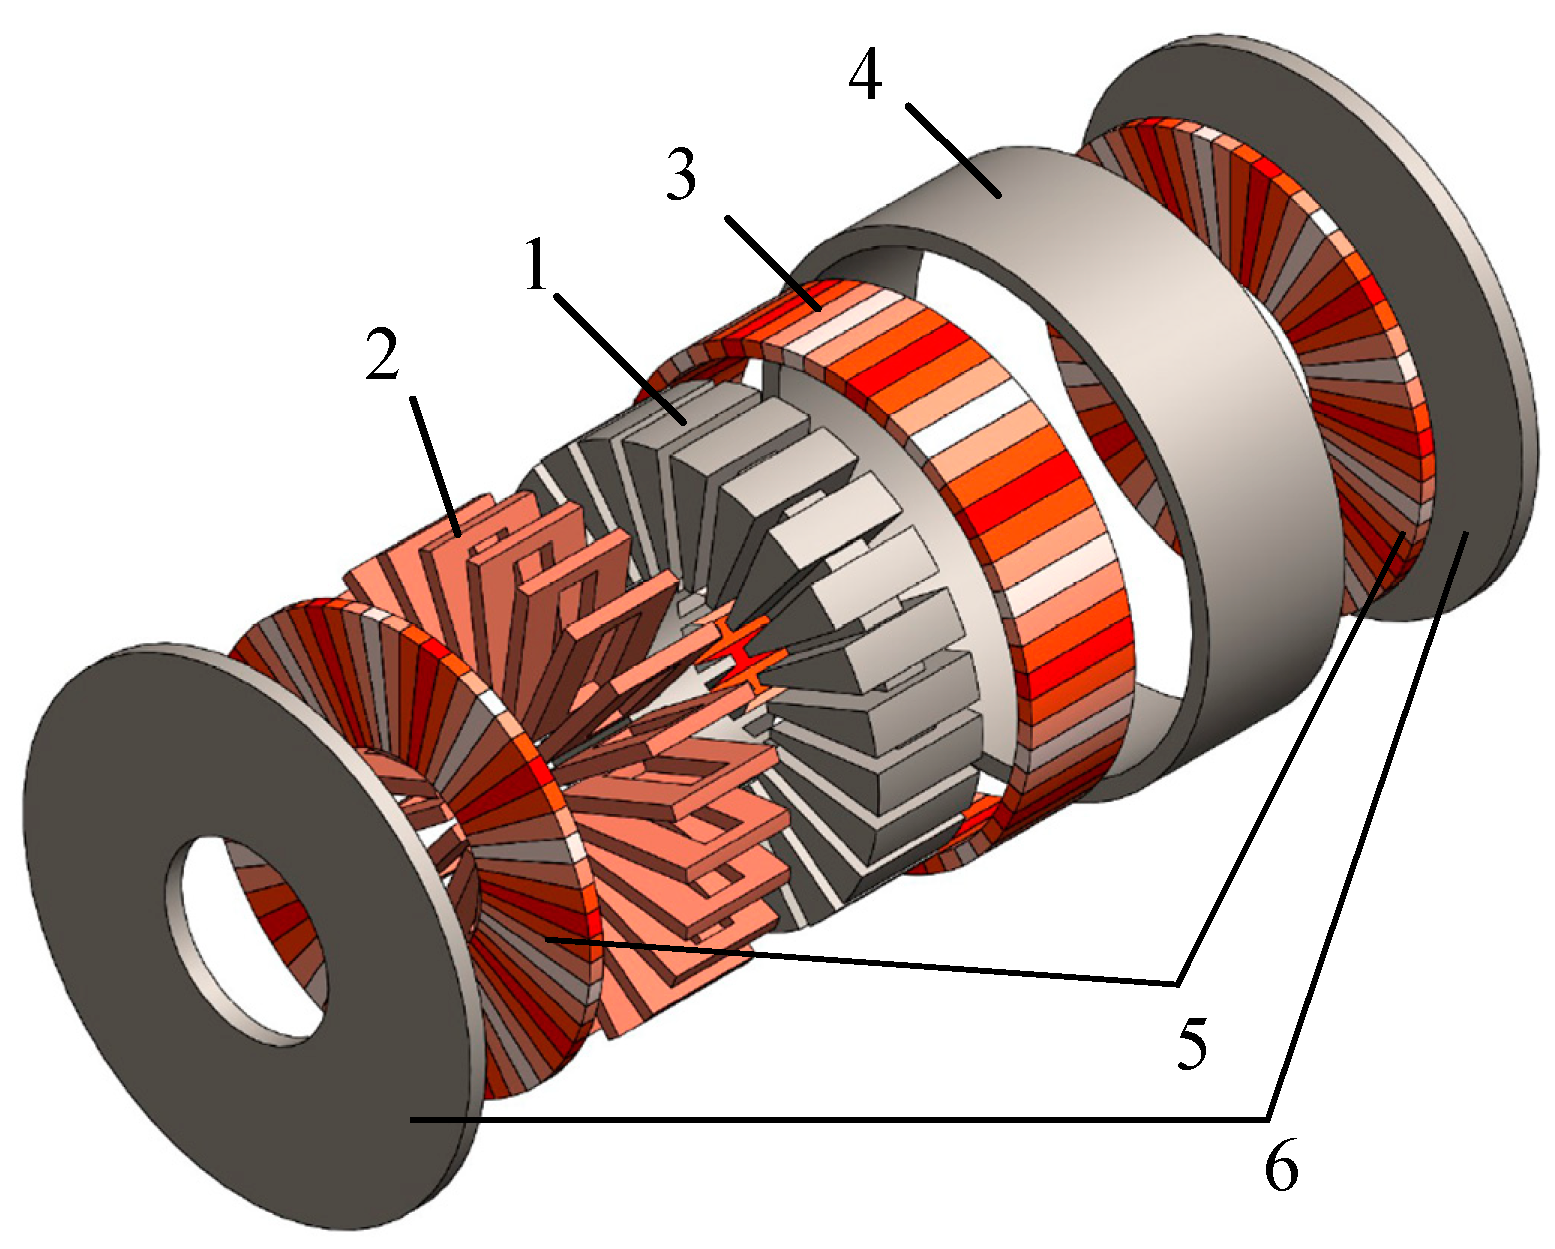 Energies | Free Full-Text | Design and Analysis of a Novel Axial-Radial  Flux Permanent Magnet Machine with Halbach-Array Permanent Magnets